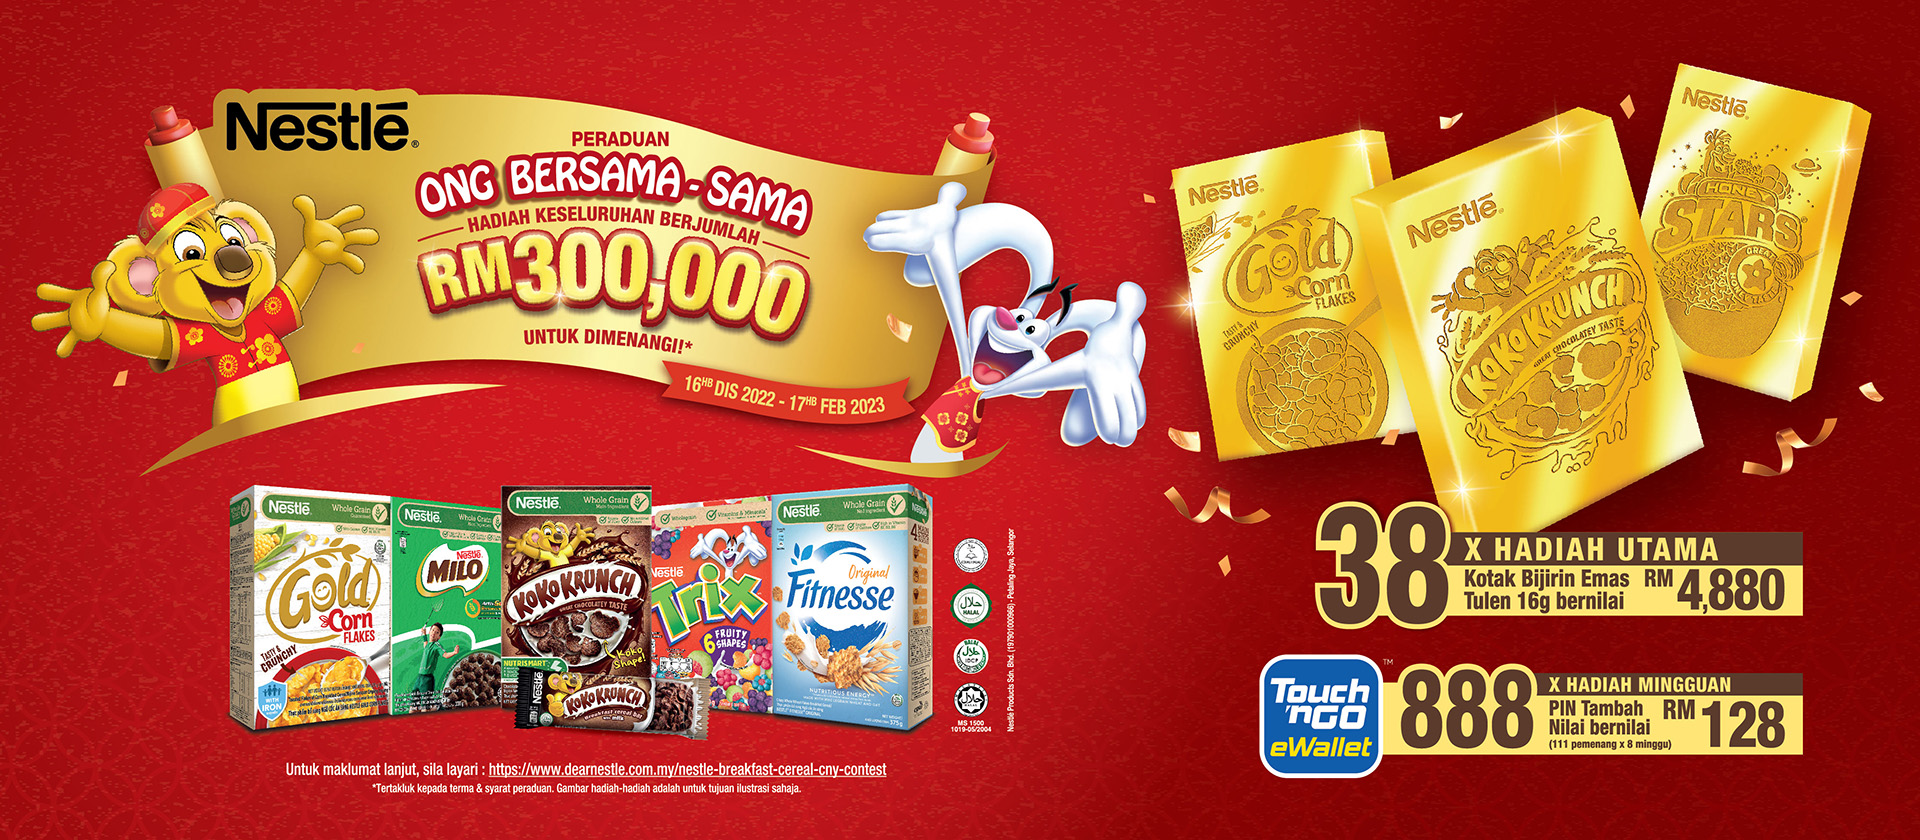 Nestle Breakfast Cereal CNY Contest